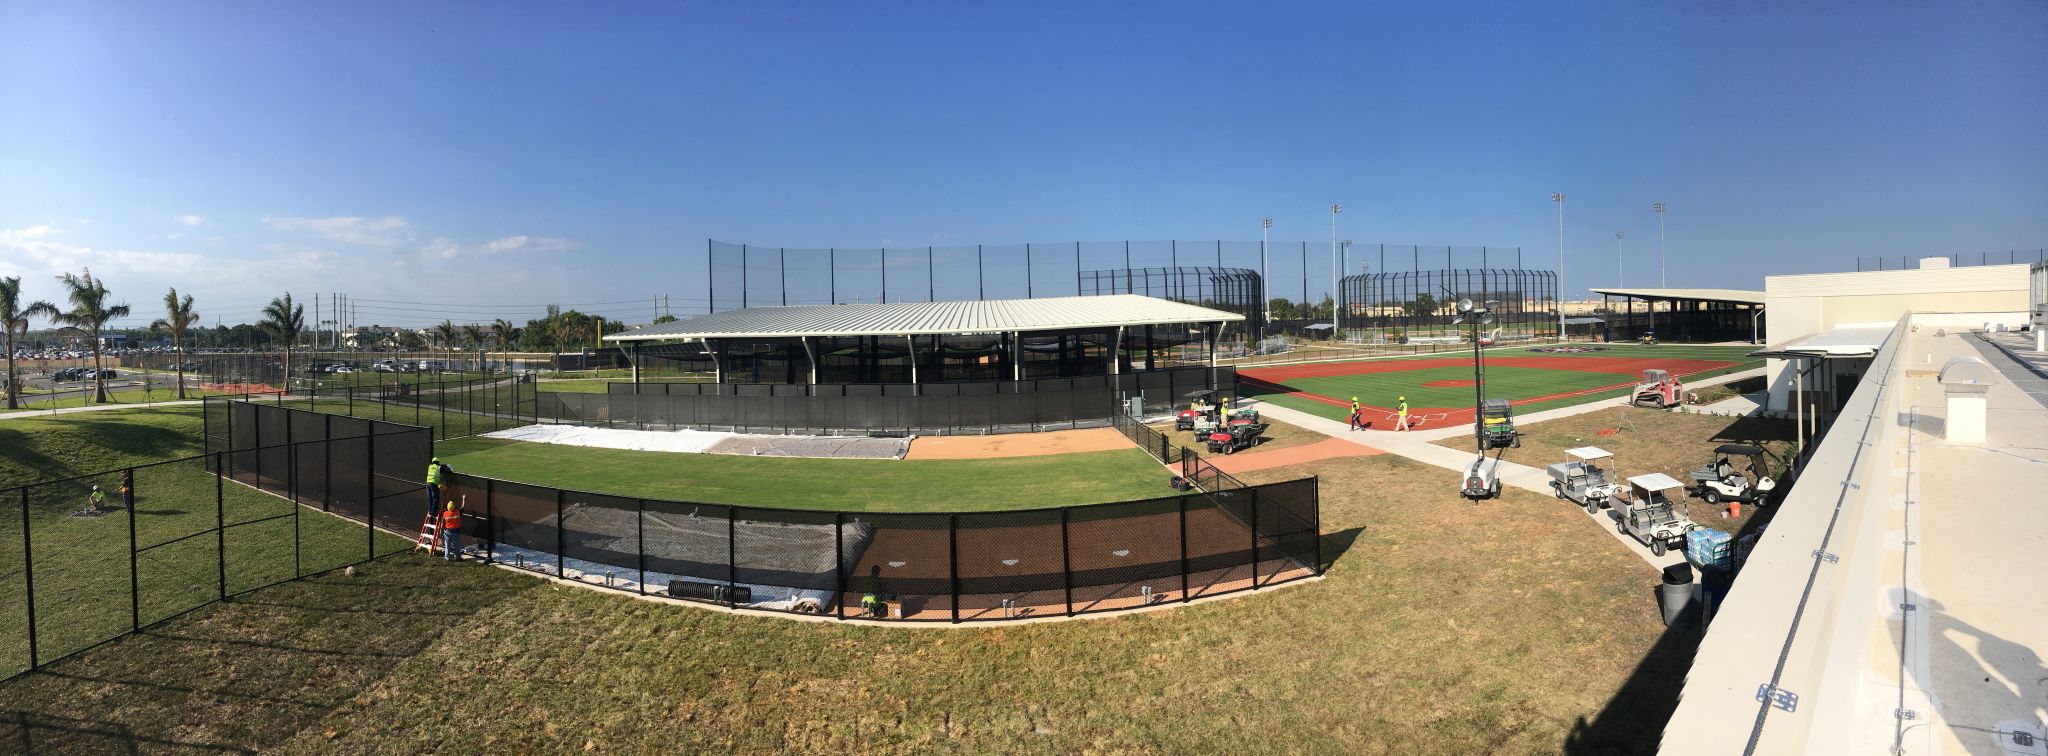 Sneak peek at the Astros' new spring training facility